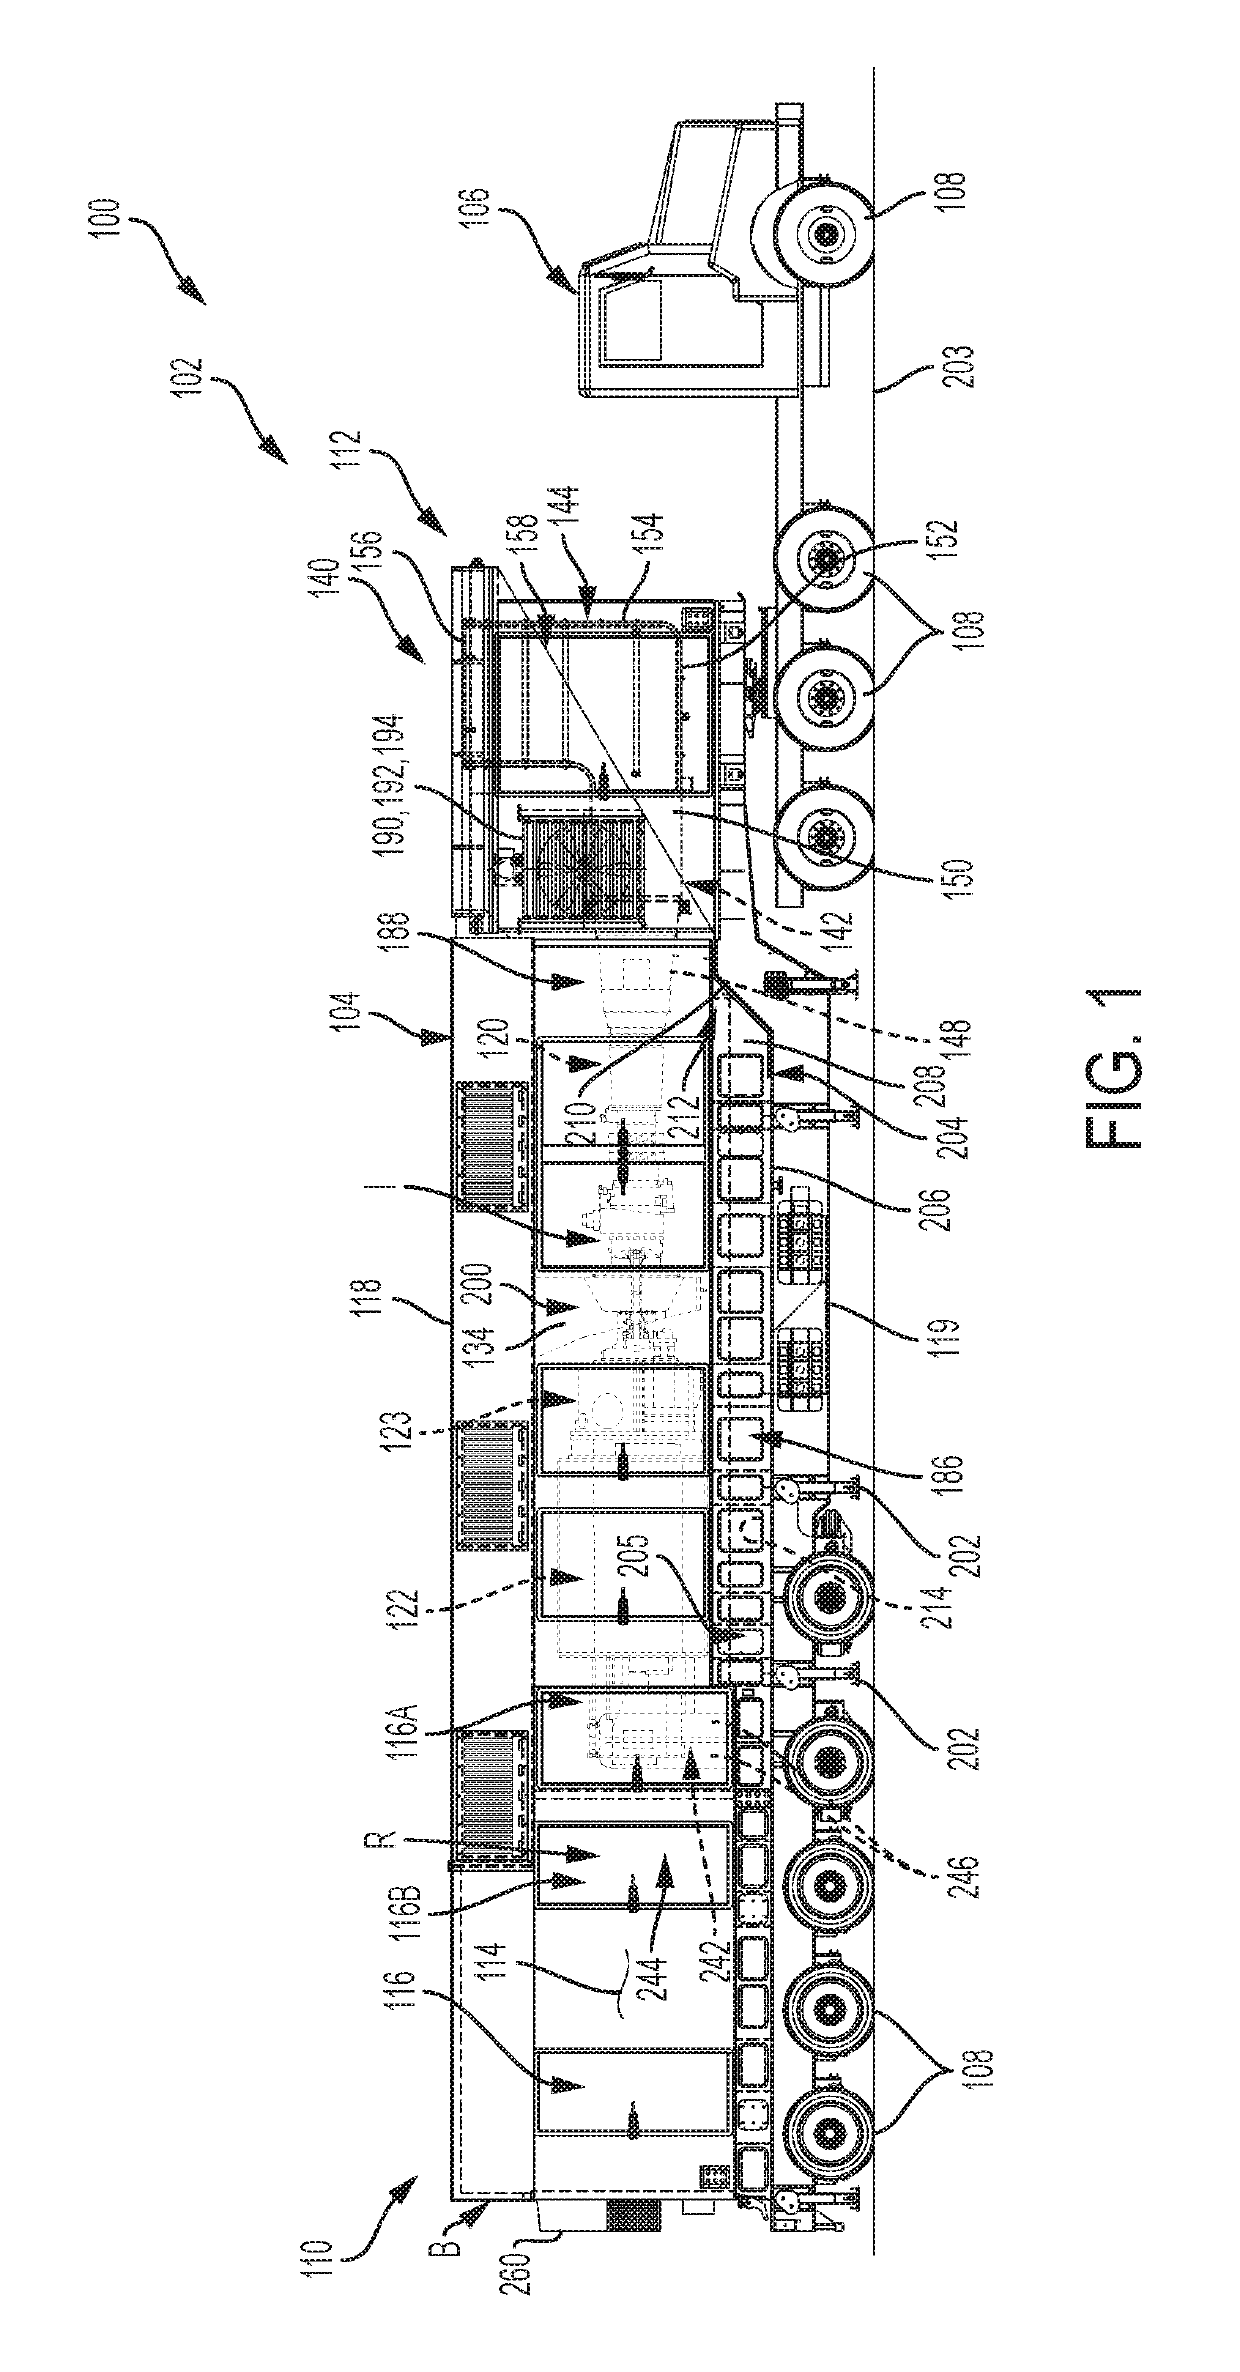 Mobile power generation system including fixture assembly